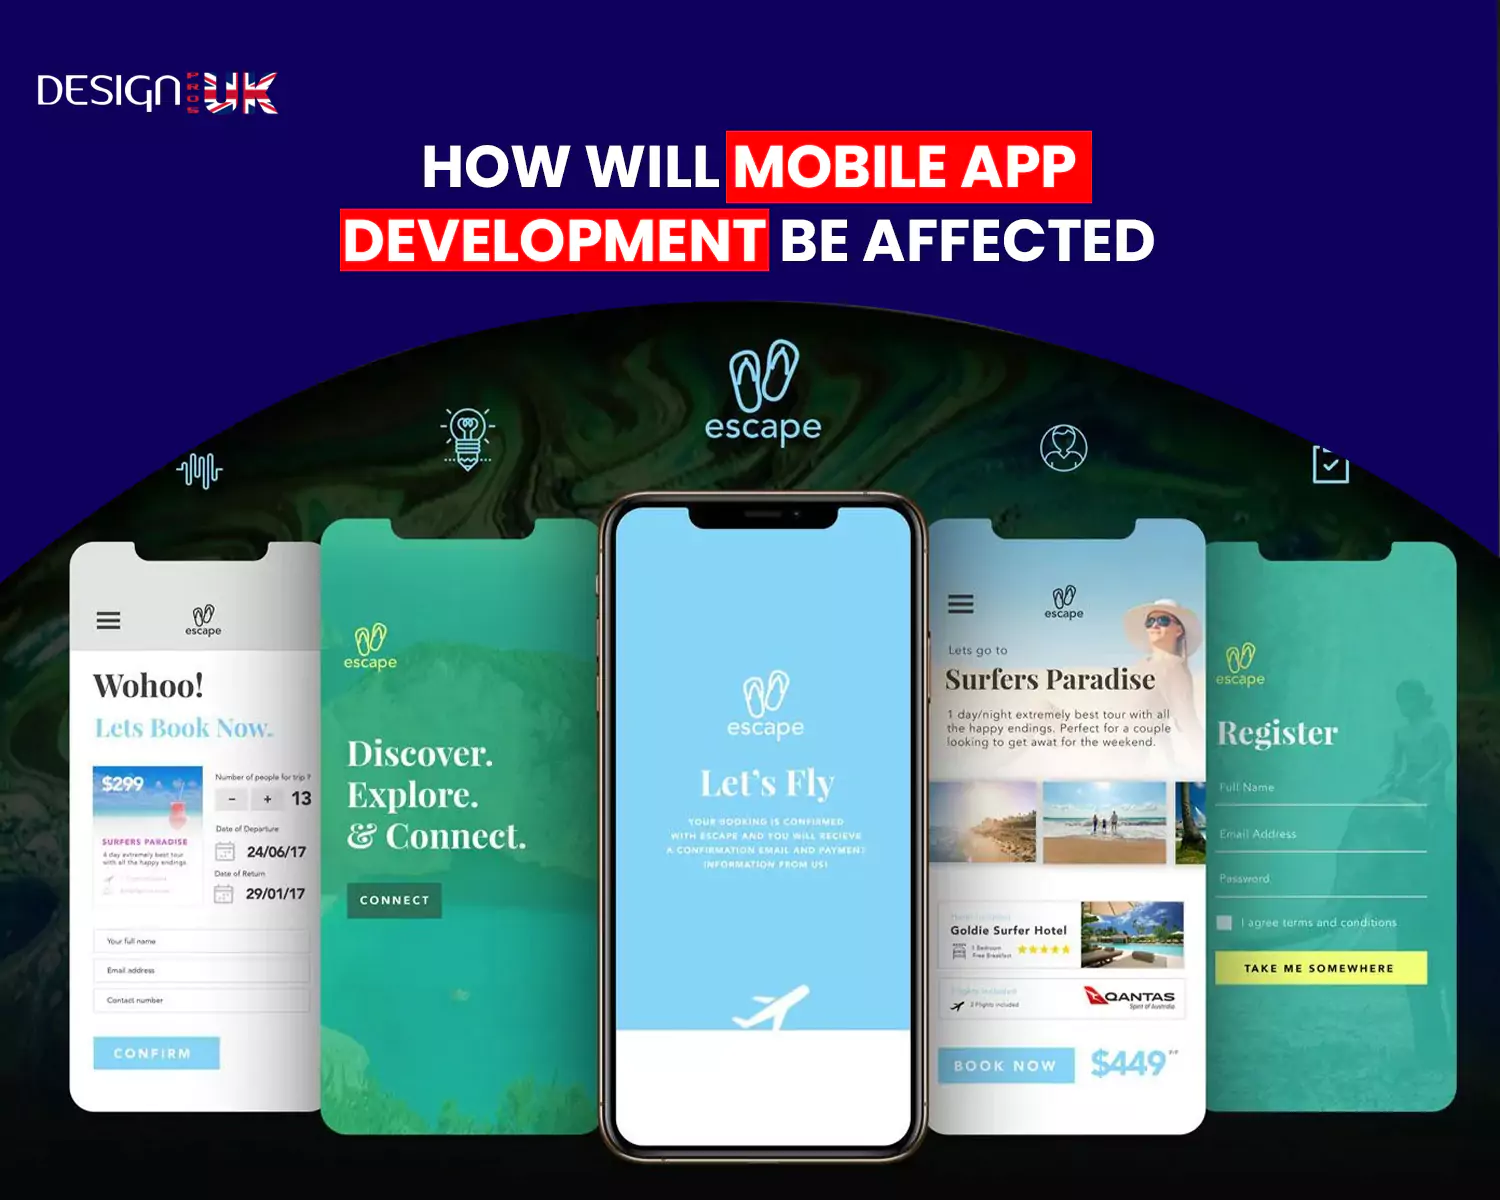 How will Mobile App Development be affected?